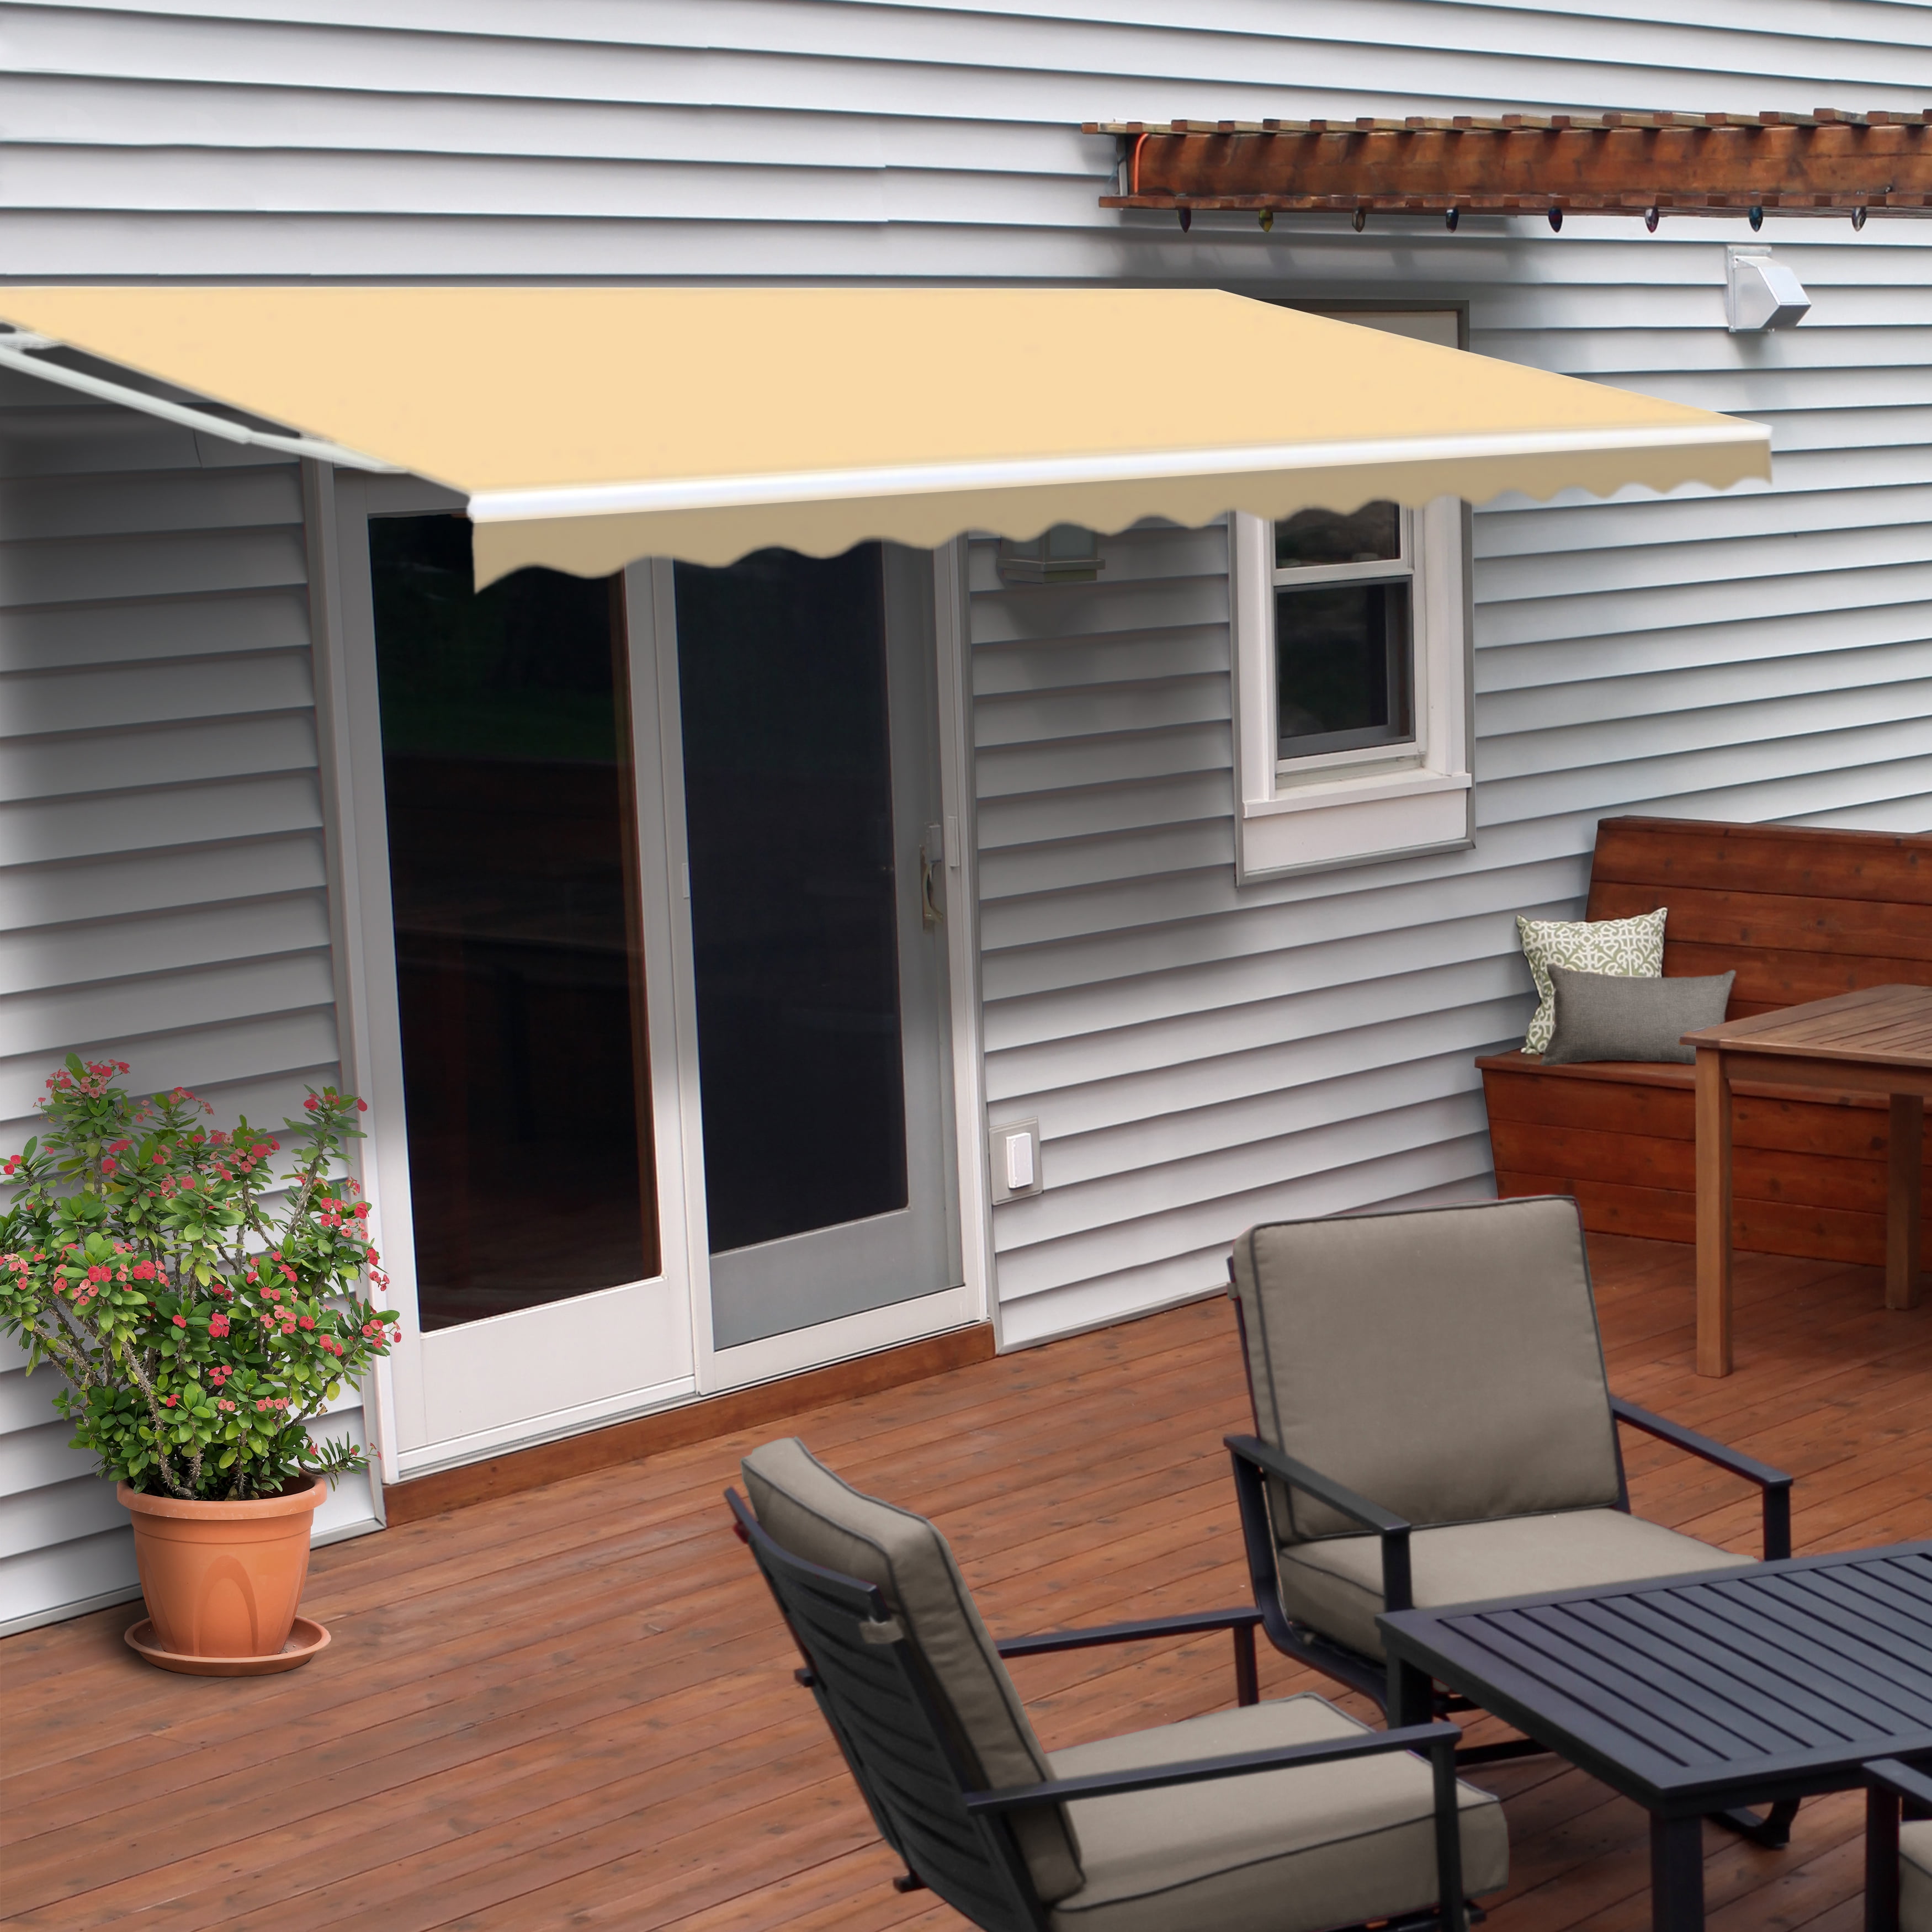 16 X 10 Ft. Retractable Outdoor Motorized Patio Awning, Ivory